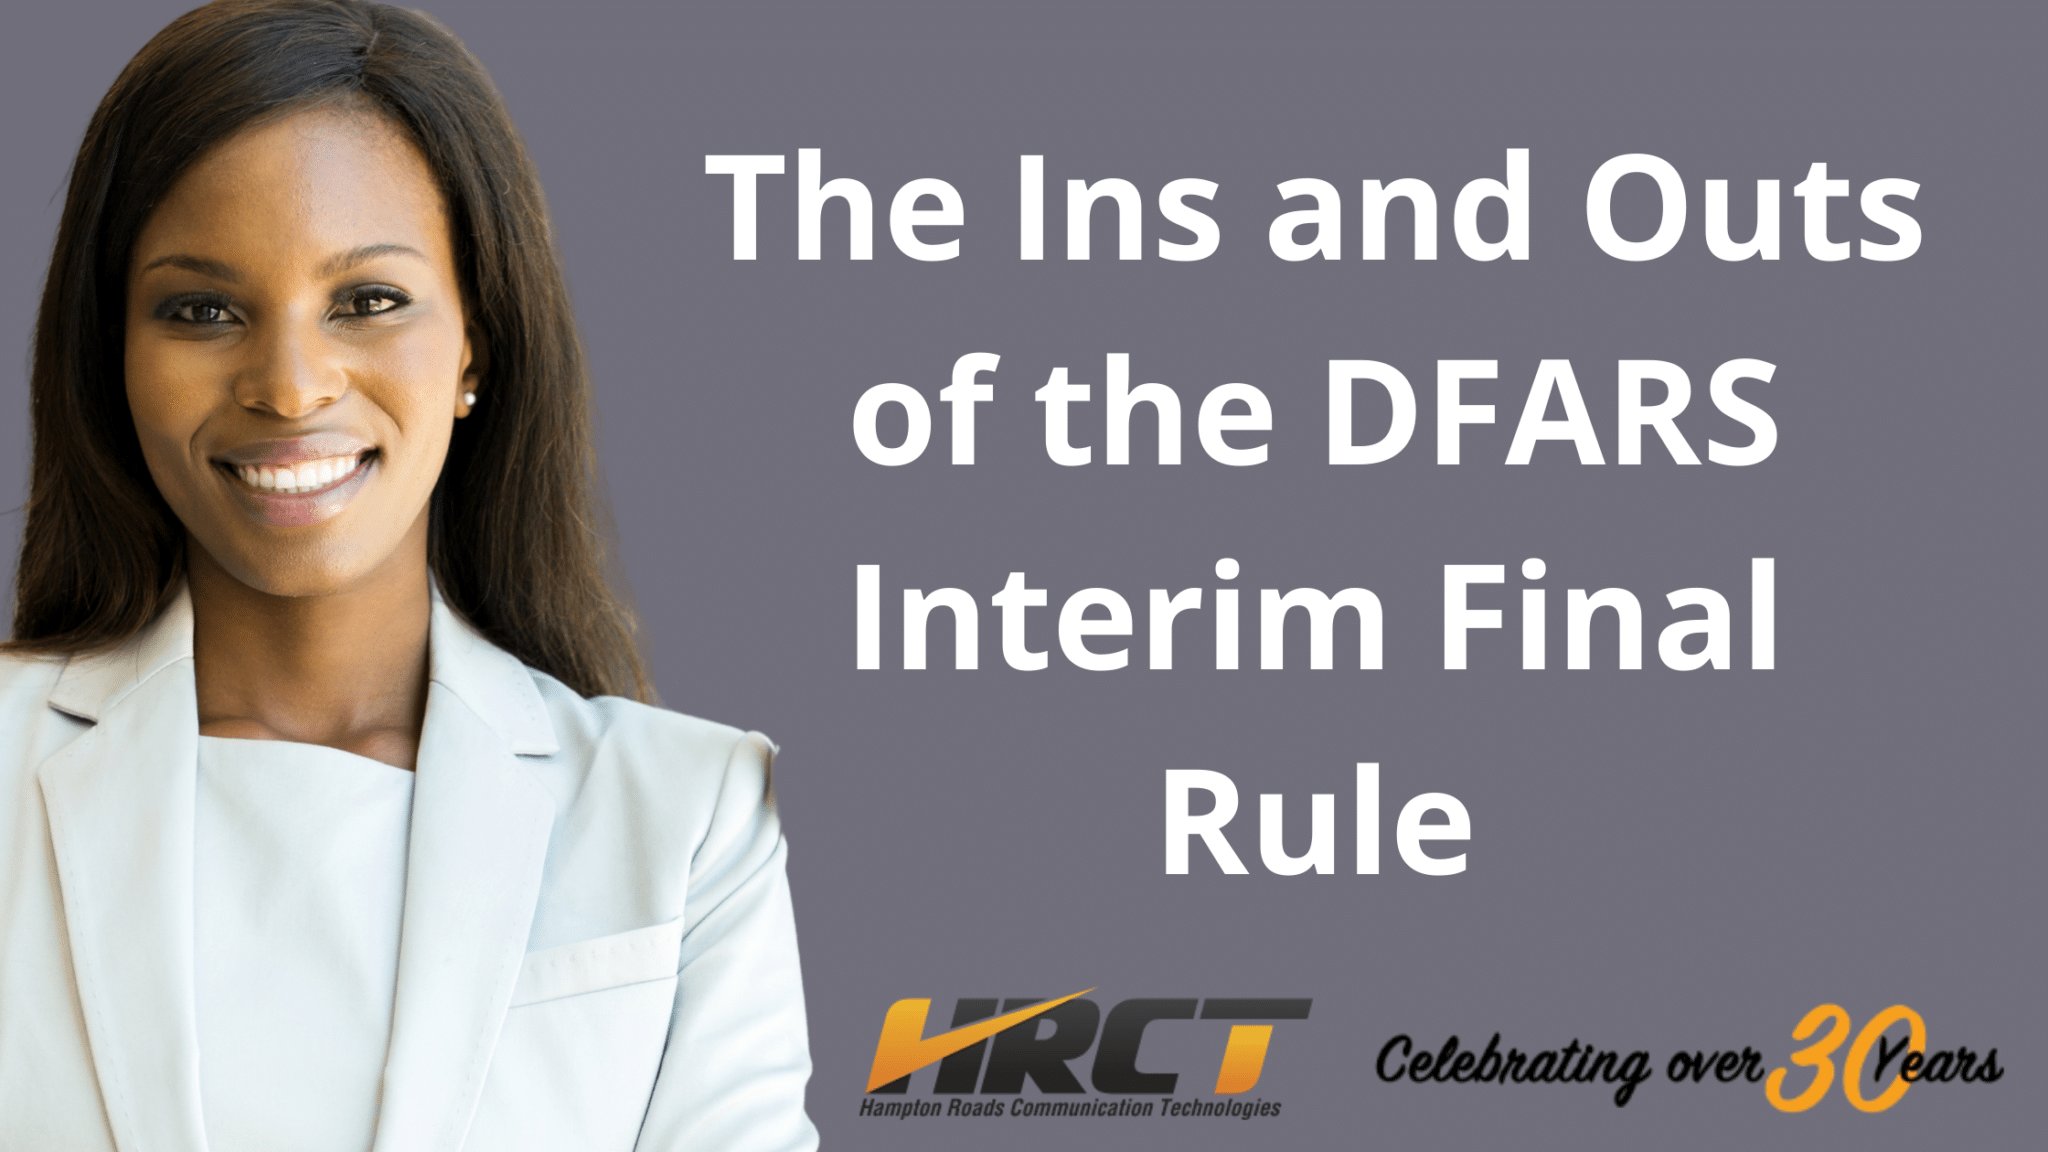 The Ins and Outs of the DFARS Interim Final Rule